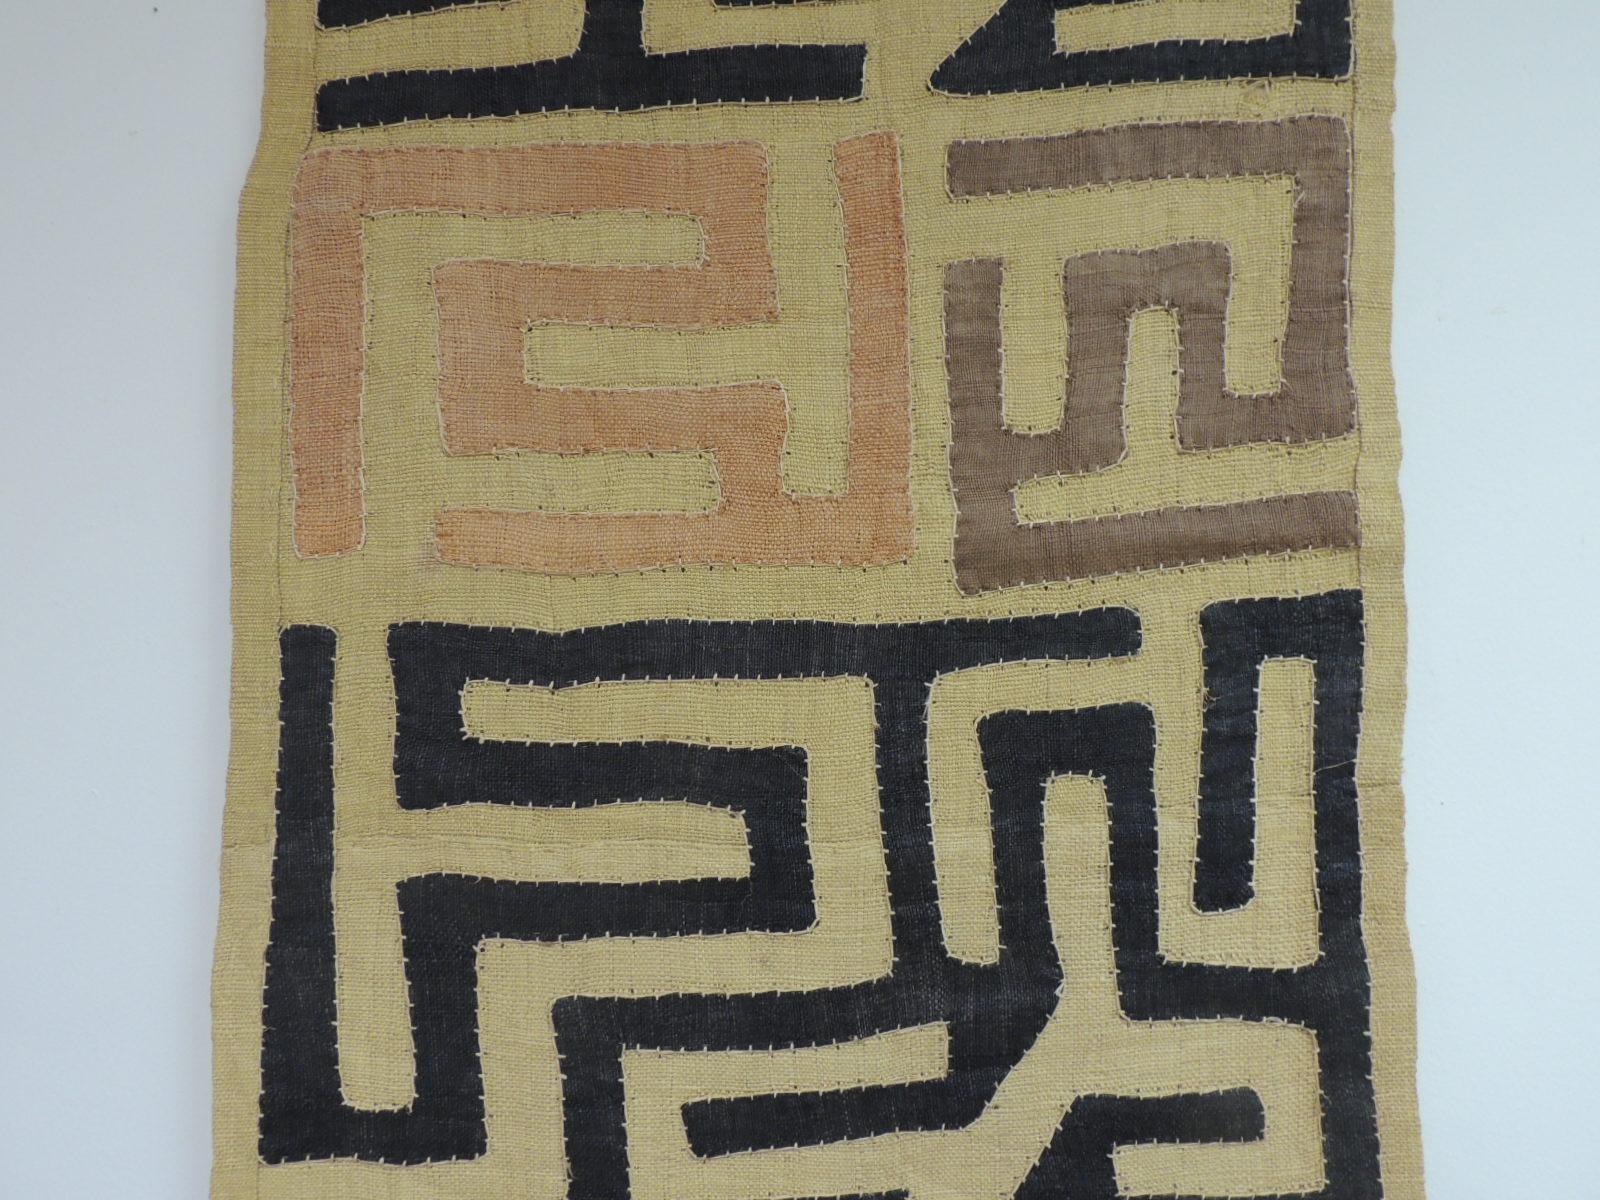 Vintage Graphic Orange Brown and Black Earth Tones African Applique Kuba Applique Textile.
Patchwork and embroidered applique design and tribal woven pattern.
In shades of brown, black, camel, taupe and natural.
The word “Kuba” means “lighting”